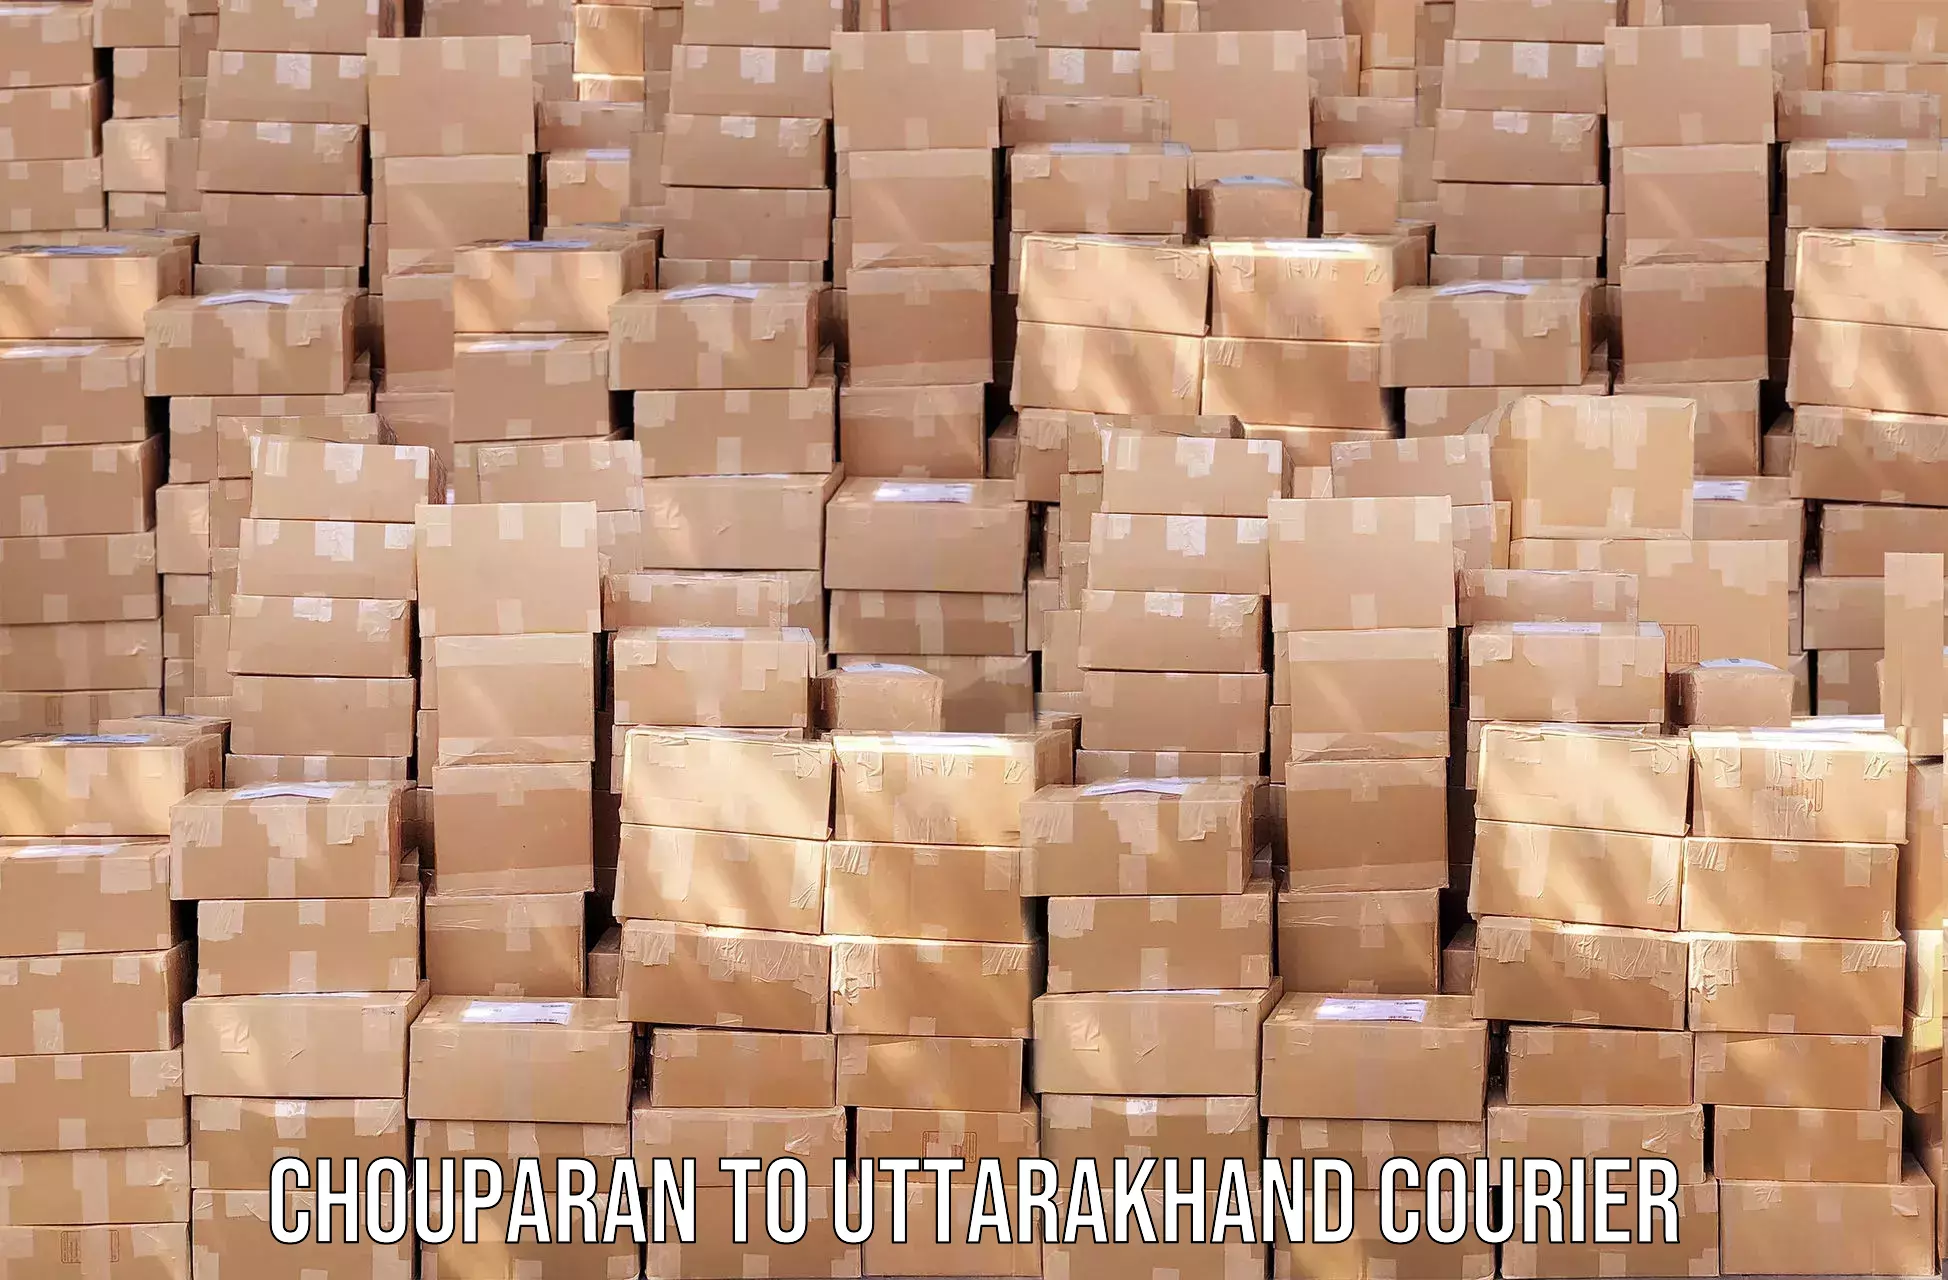 Courier service booking Chouparan to Uttarakhand